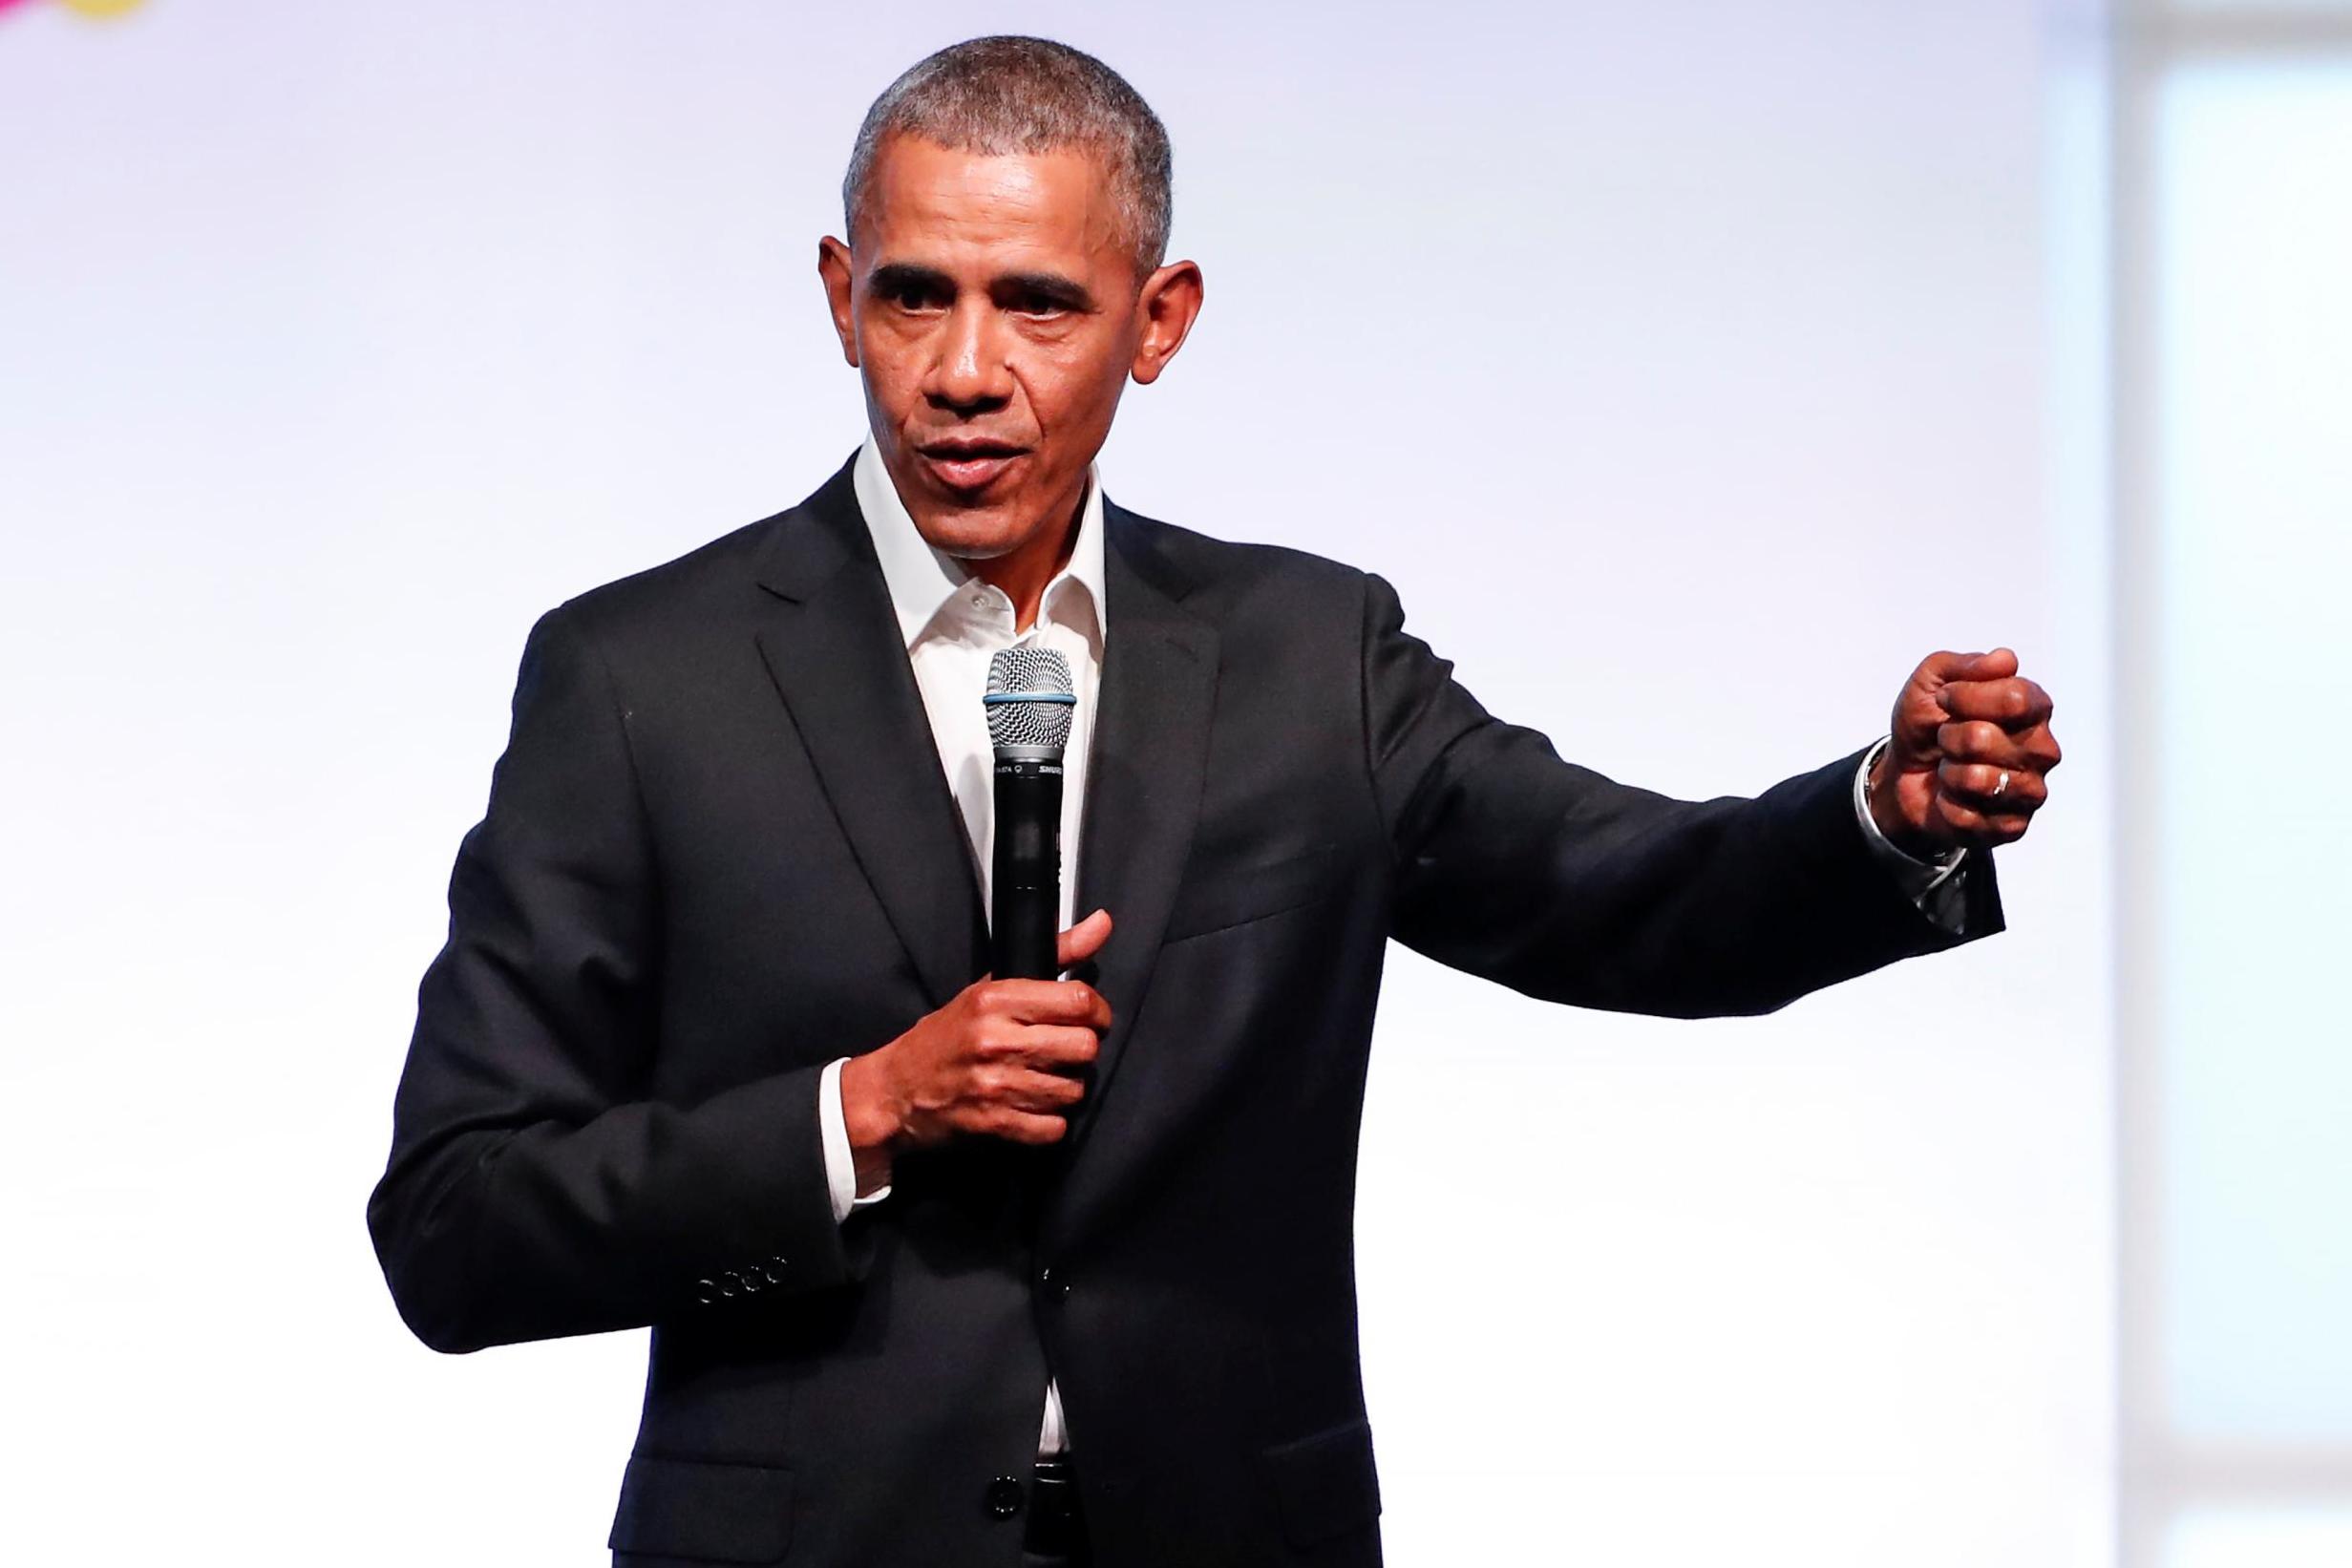 Former US President Barack Obama is about to go back on the campaign trail to help Democrats in California and Ohio ahead of the 2018 midterm elections